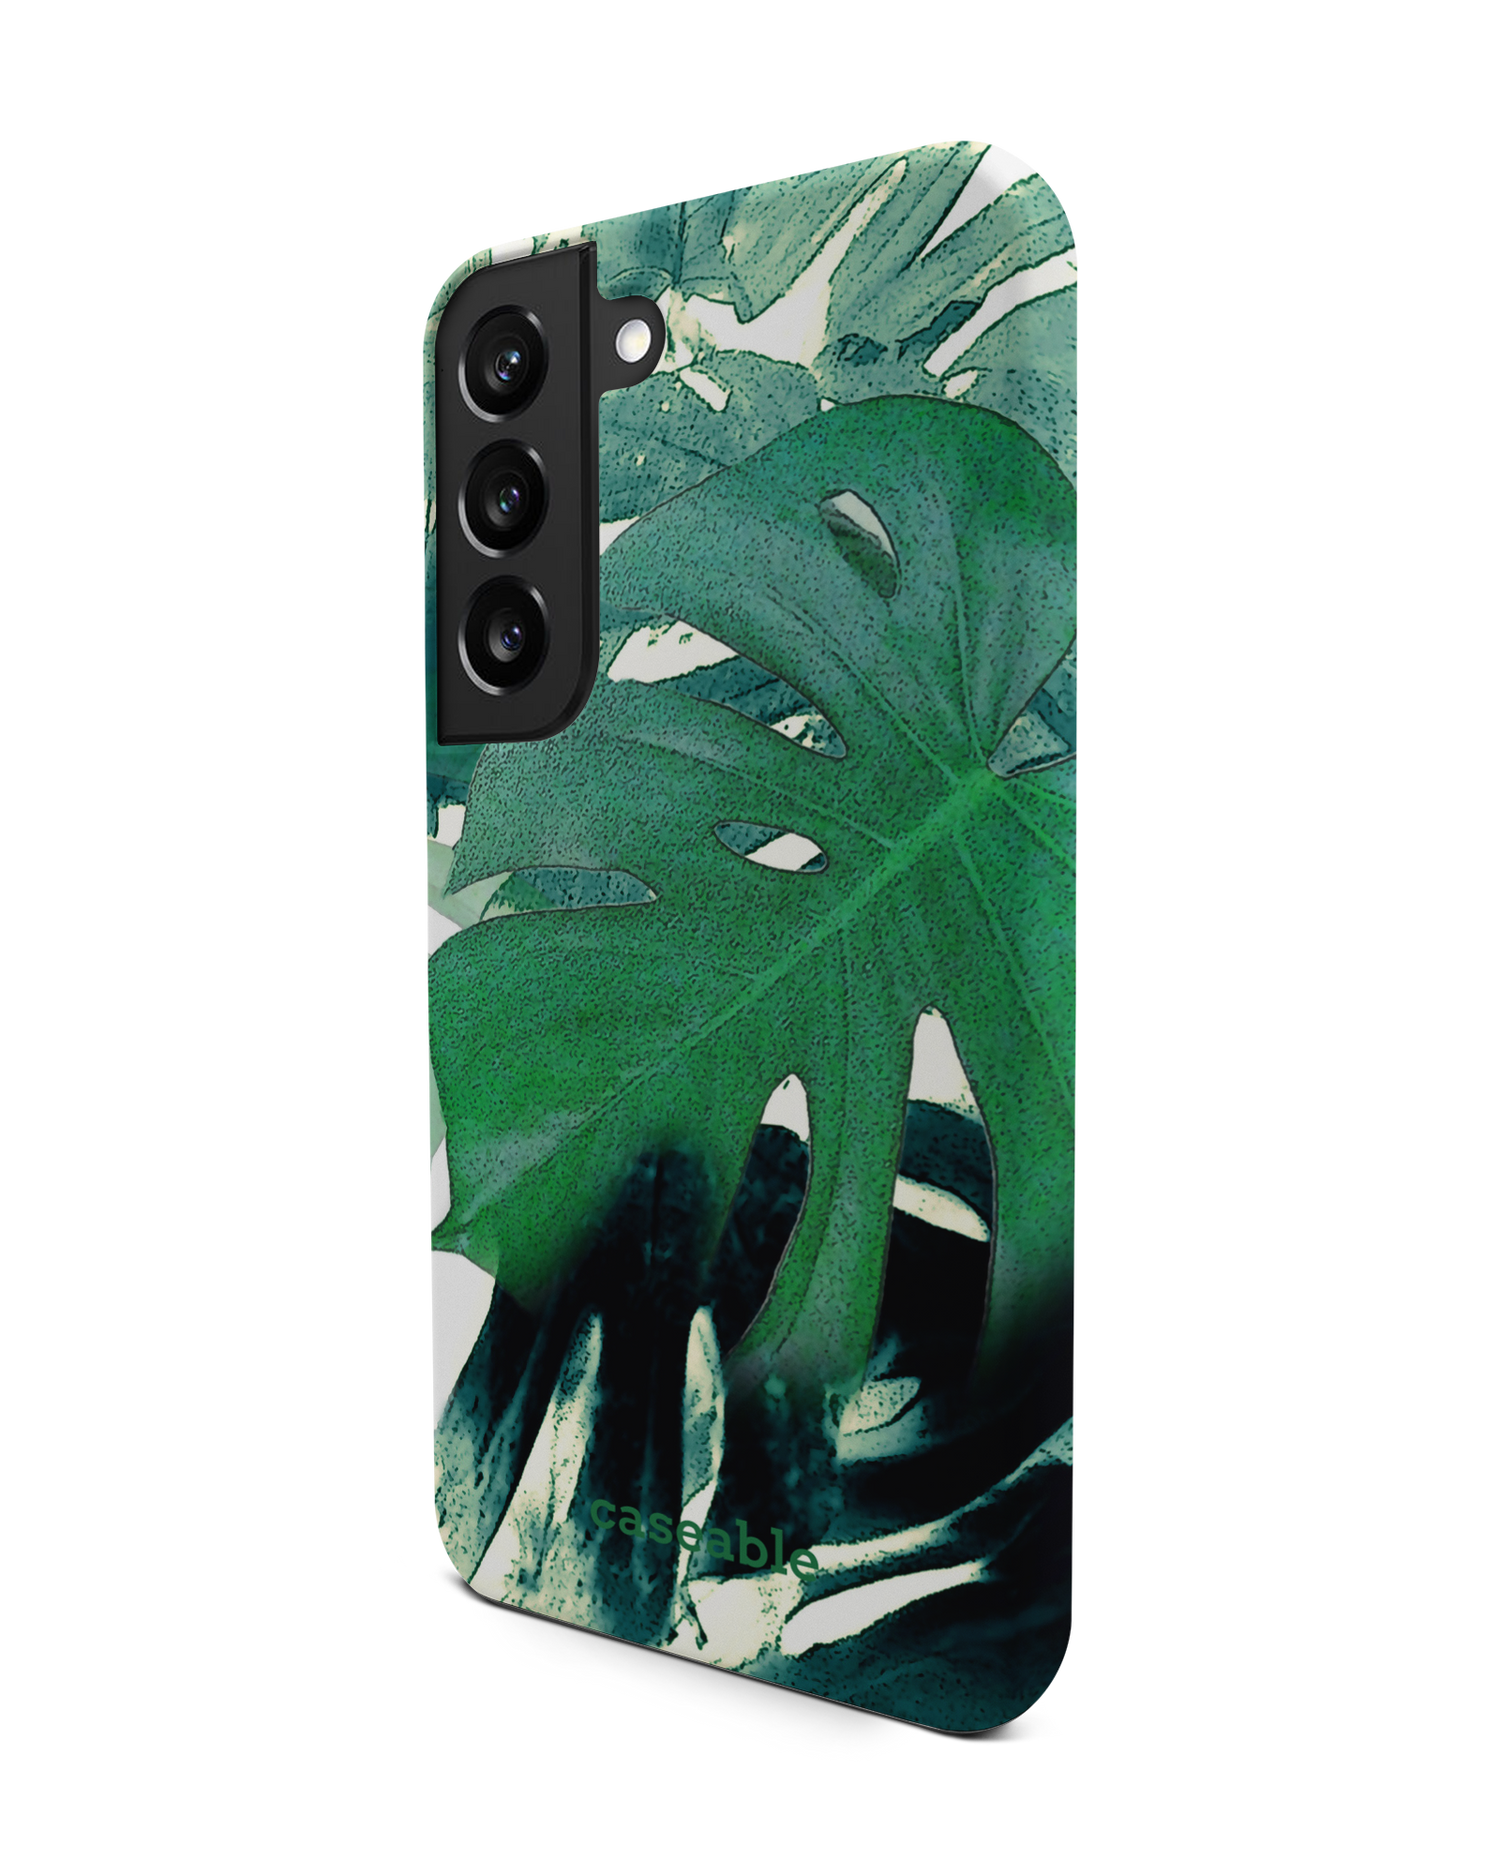 Saturated Plants Premium Phone Case Samsung Galaxy S22 5G: View from the right side